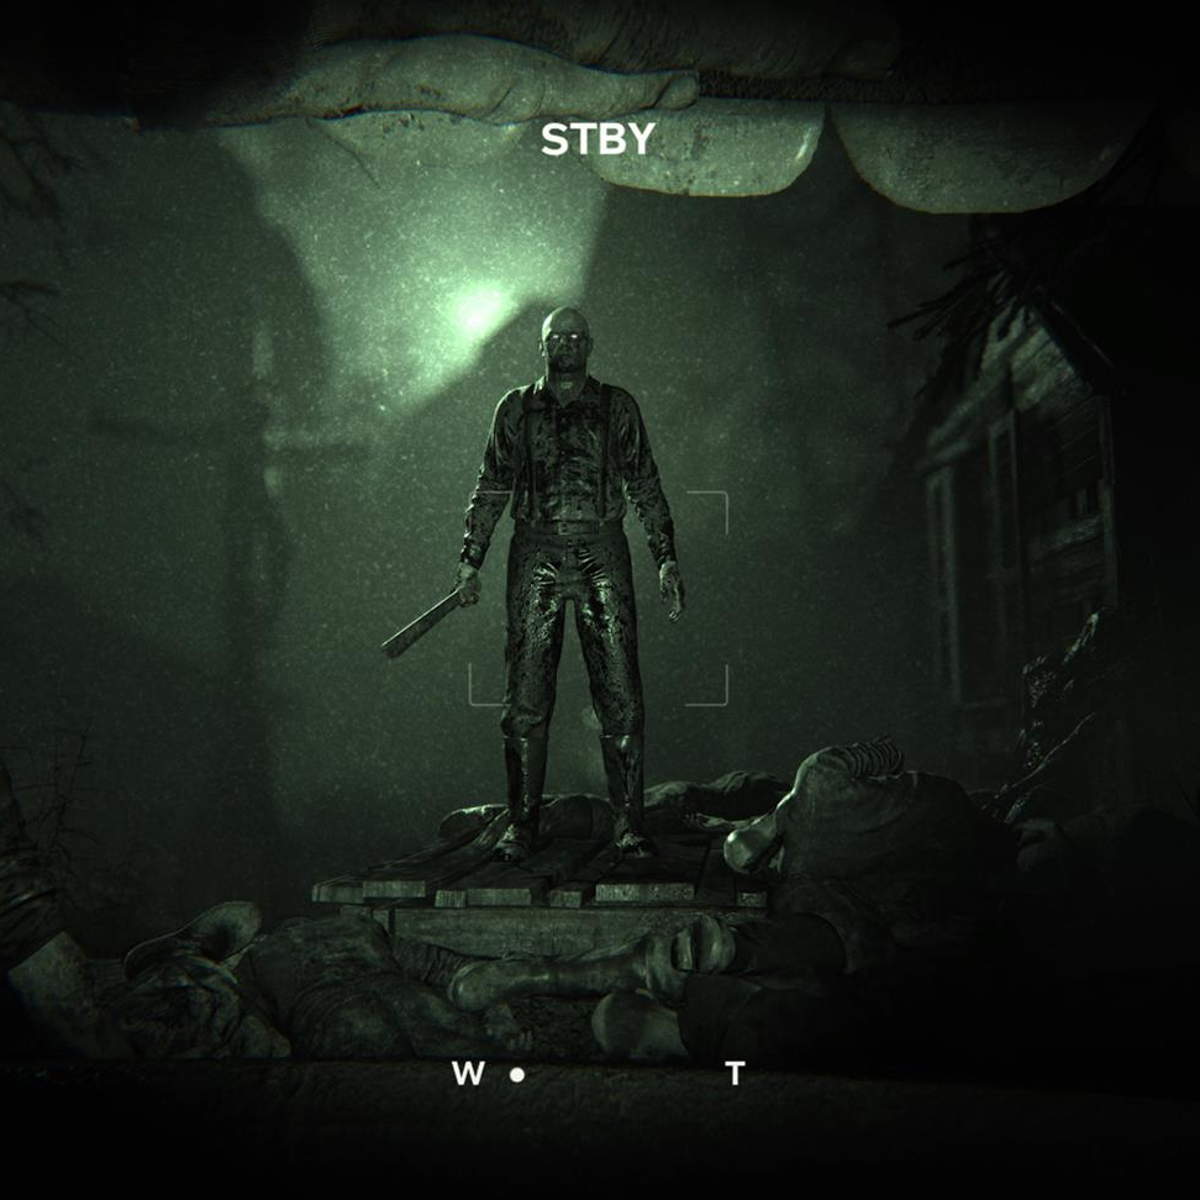 Аутласт набор. The outlast trials xbox